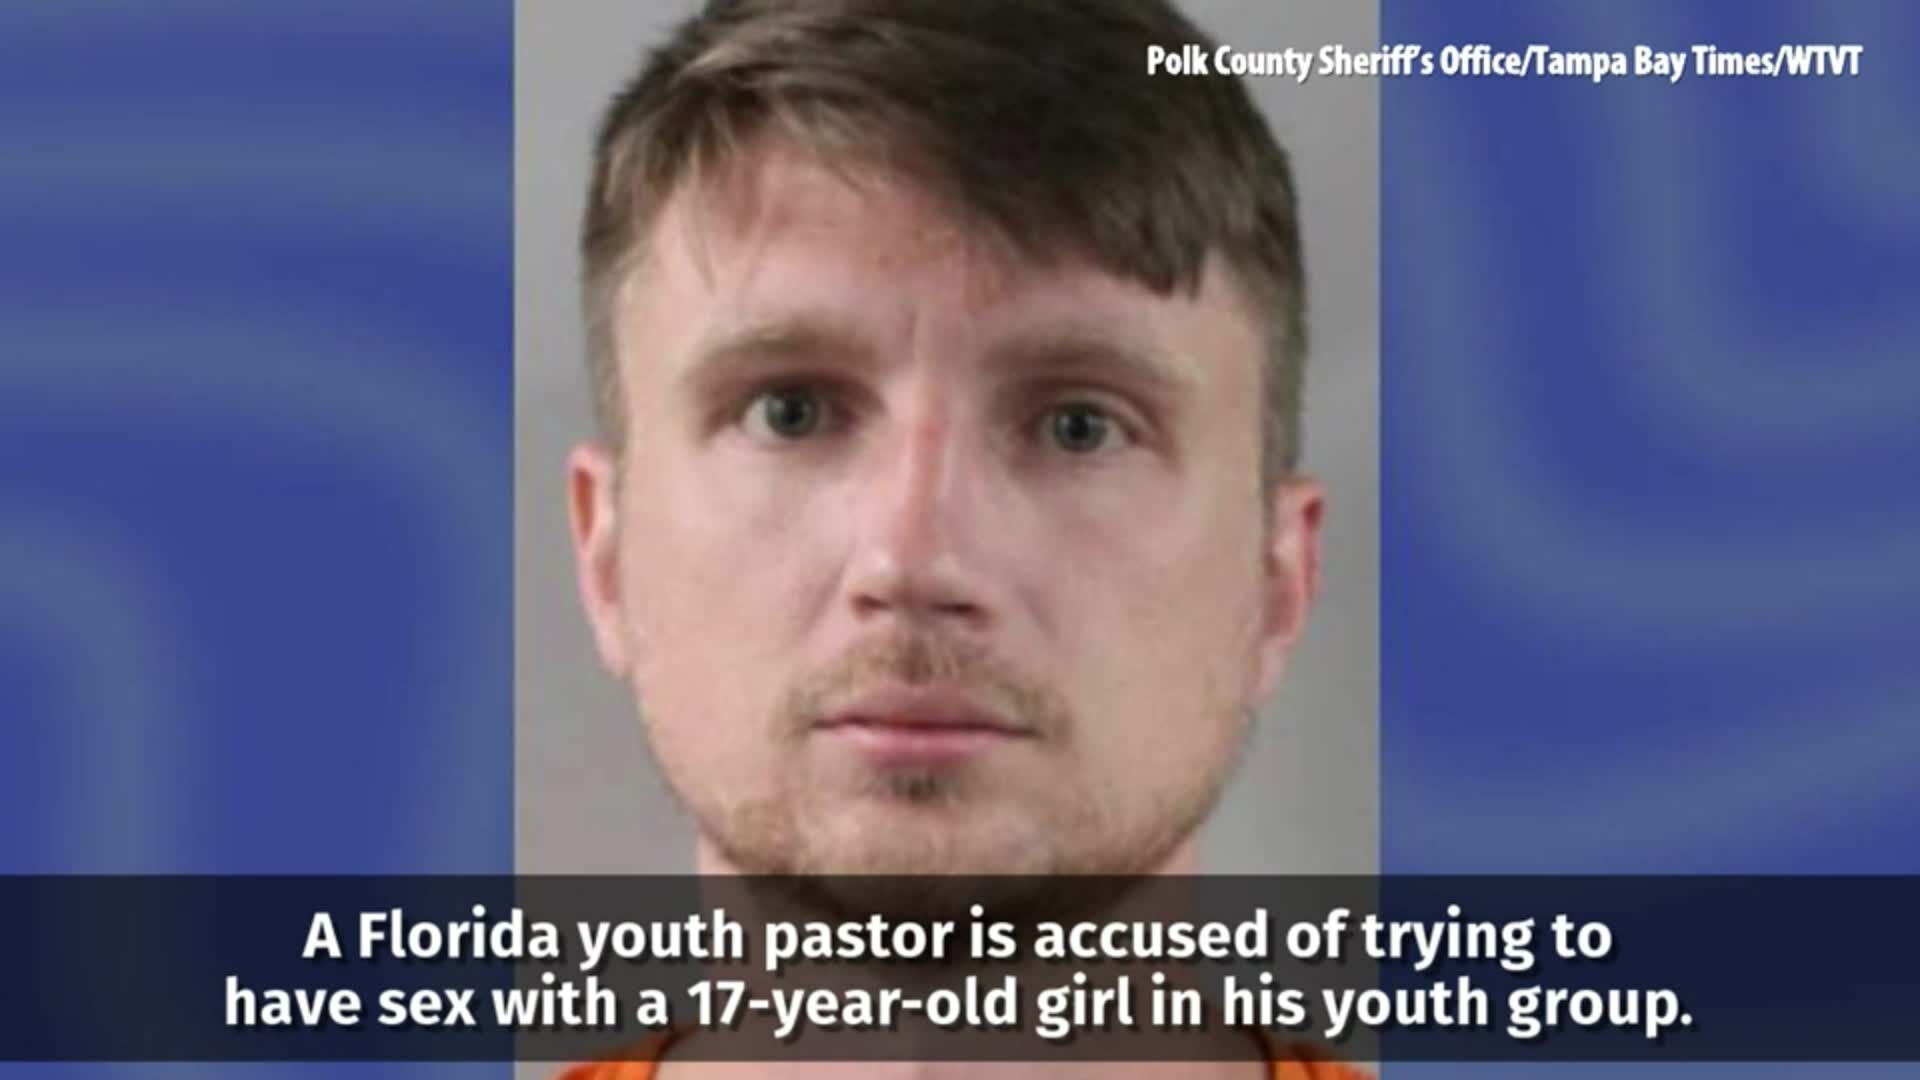 Florida youth pastor accused of attempted sex with minor Trending fox23